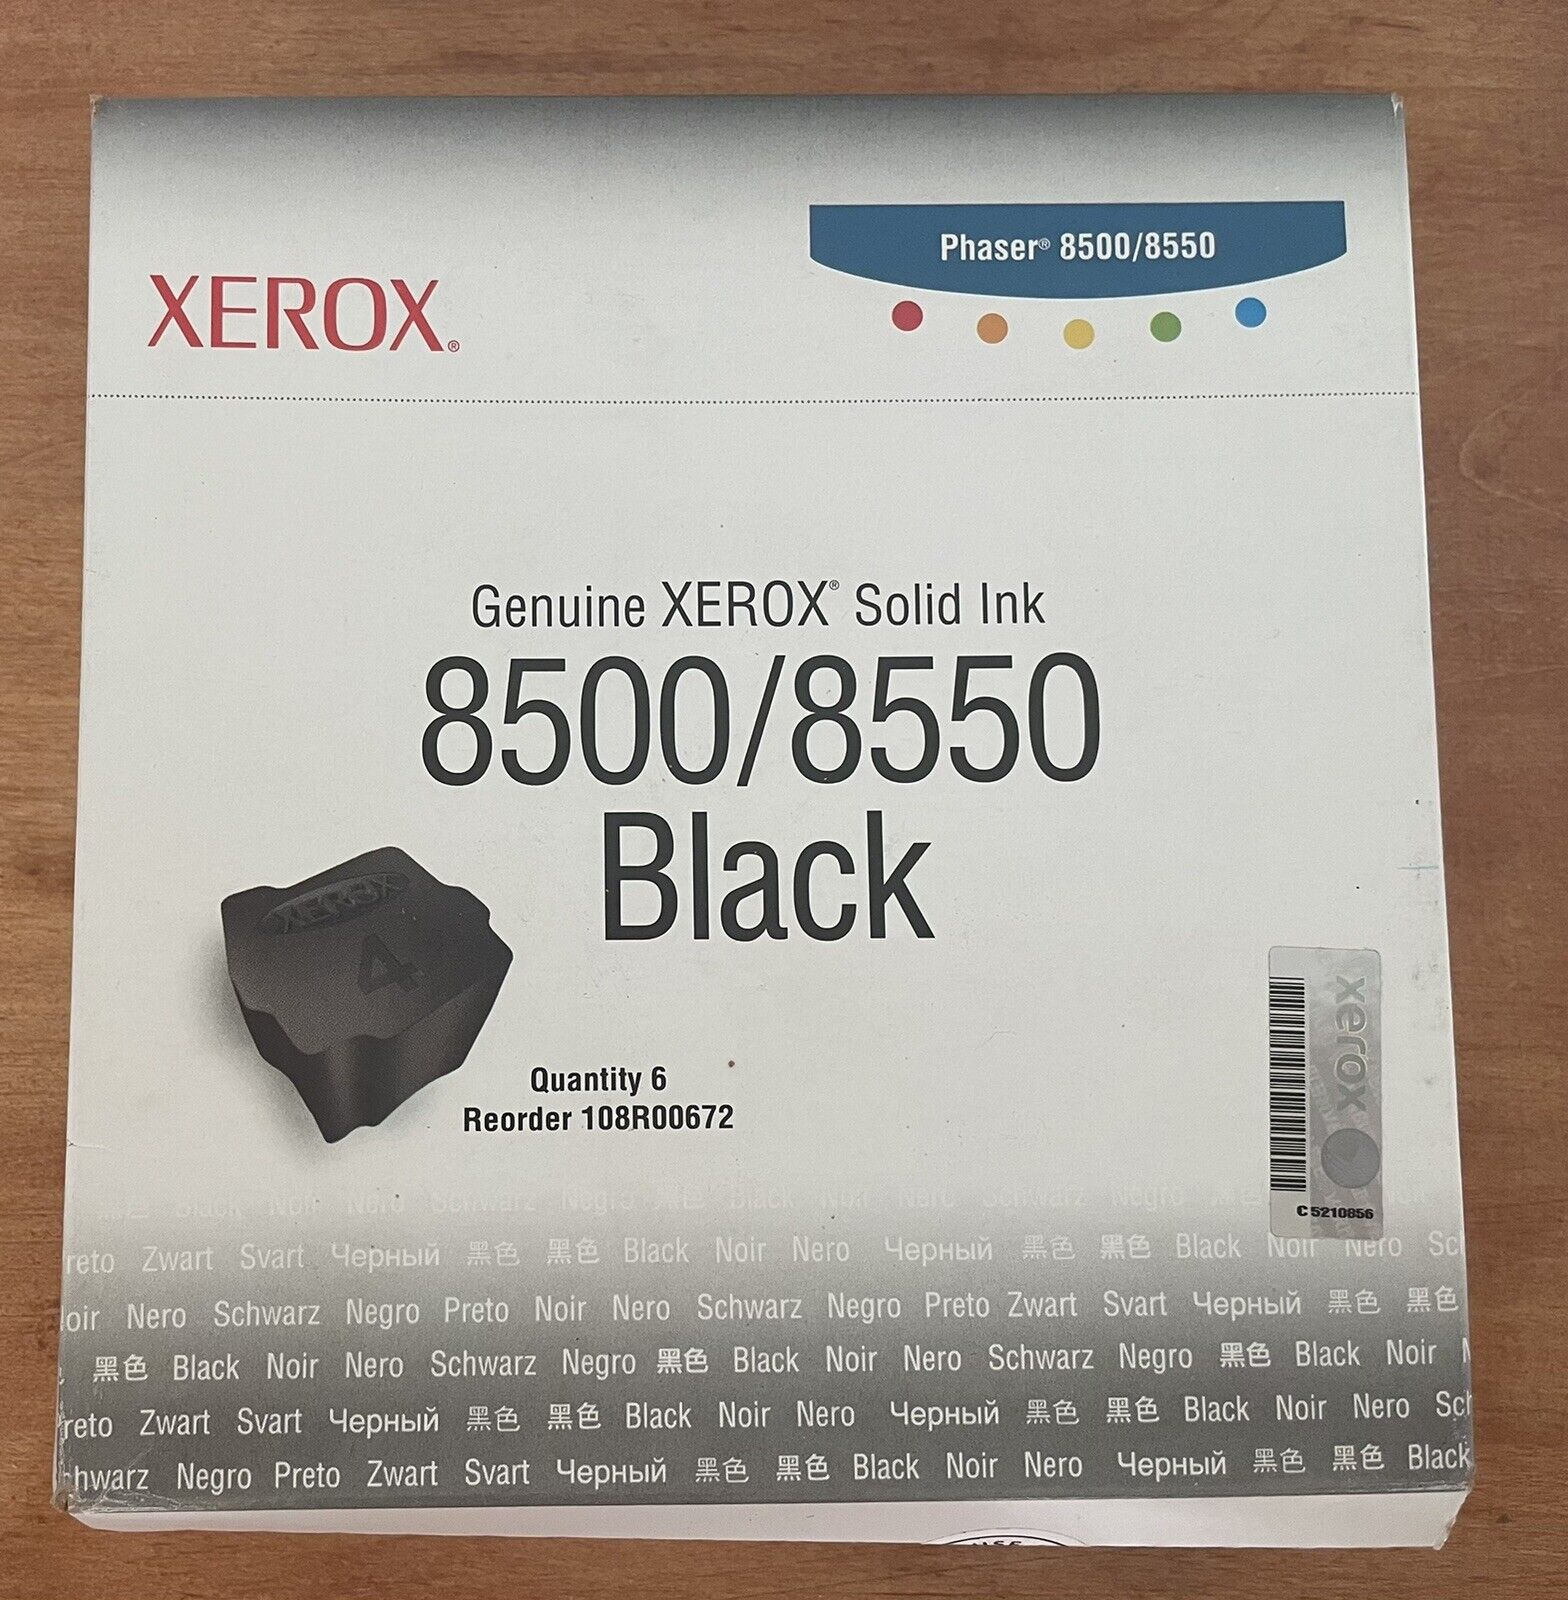 New-Xerox Black Solid Ink~Phaser 8500/8550- 6 Cubes,-108R00672-Genuine,Unopened